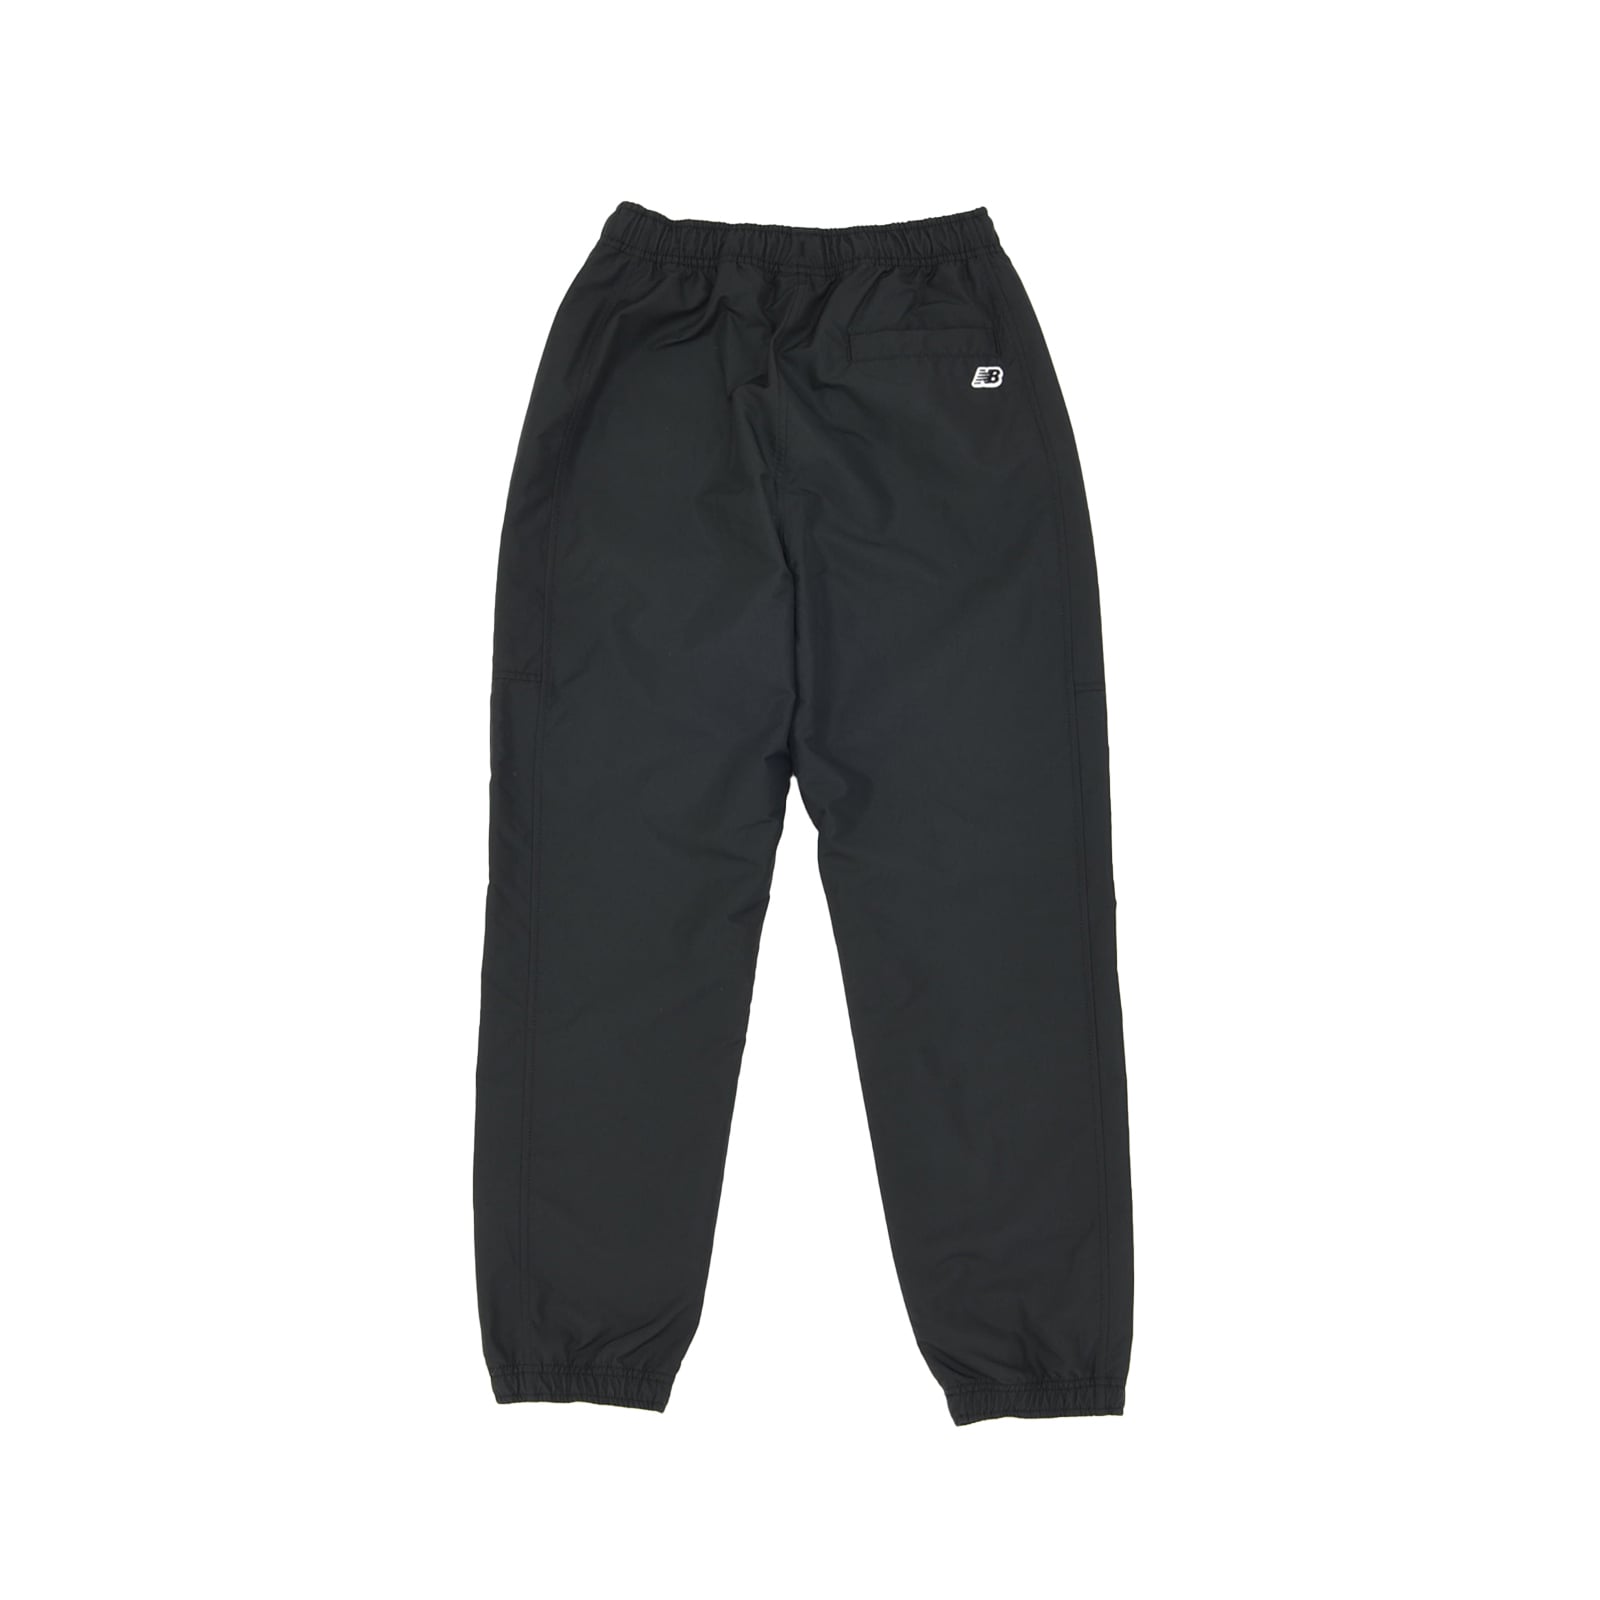 Wind pants with mesh lining